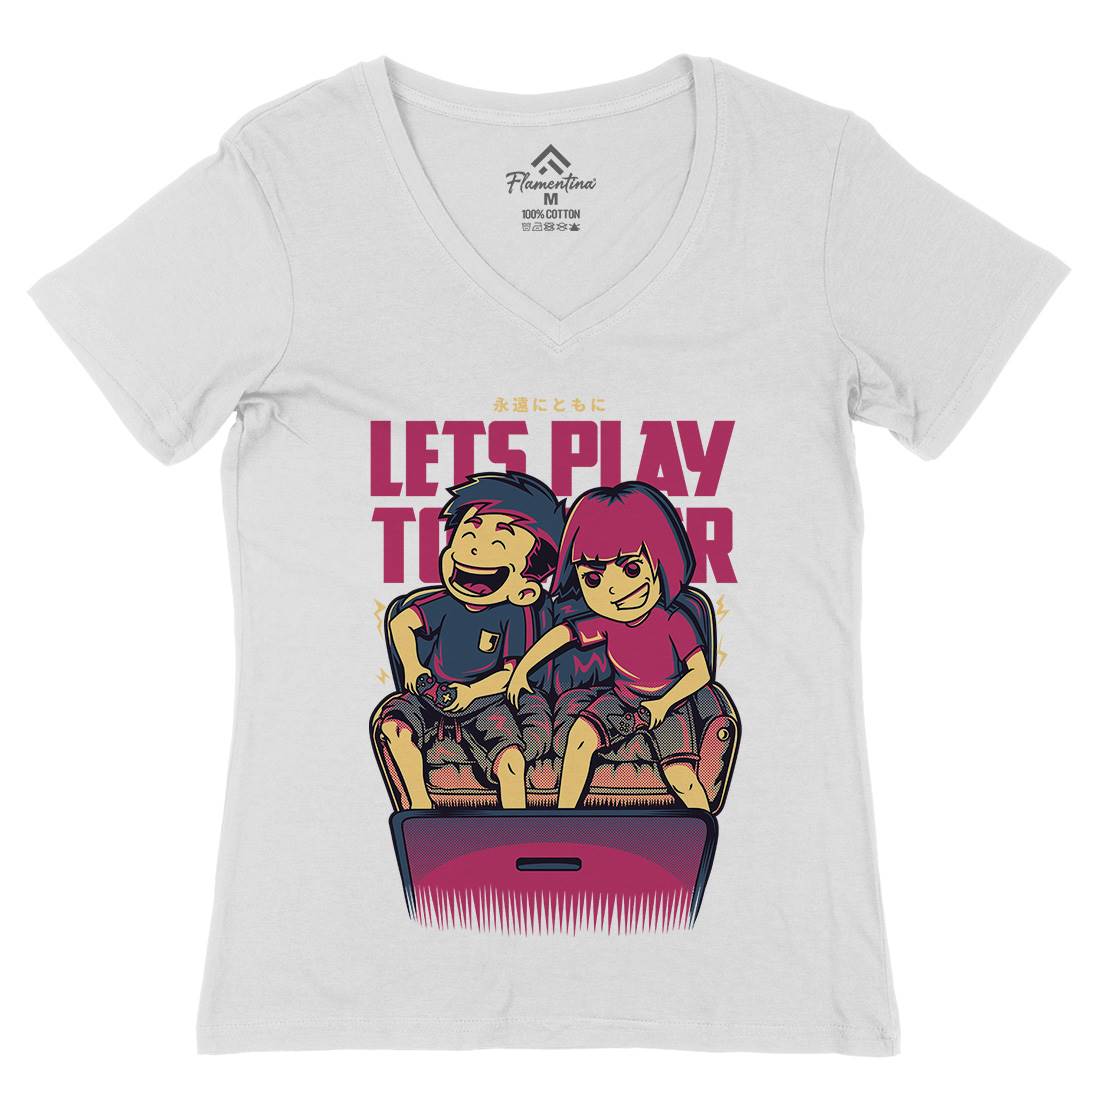 Lets Play Together Womens Organic V-Neck T-Shirt Geek D635